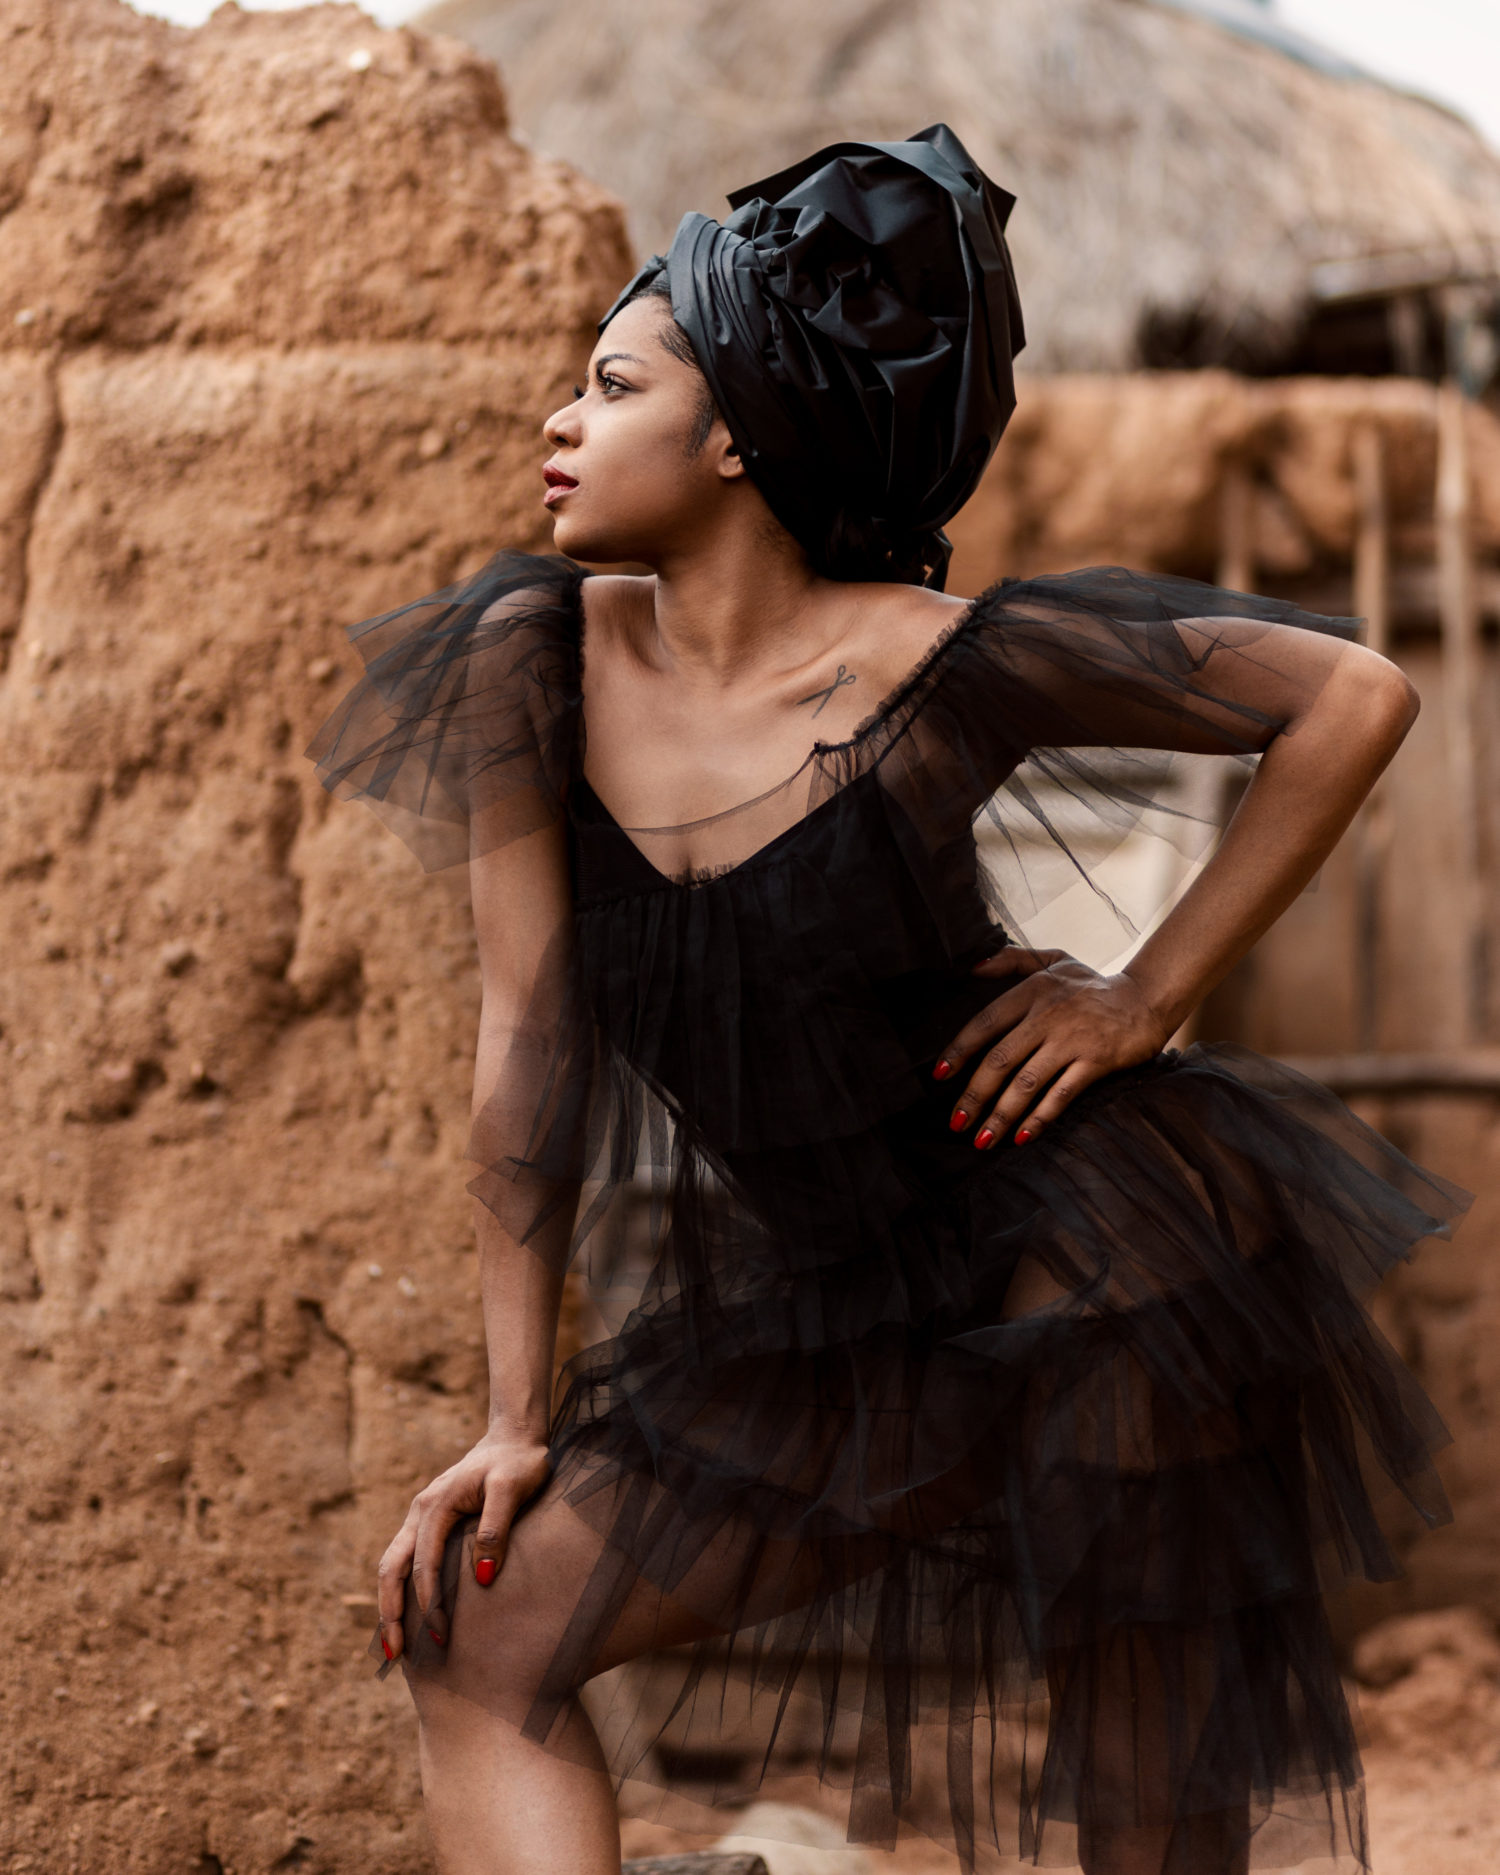 Vonne Couture Shares Their Fascinating Spring/Summer 19 Collection Titled ‘Dudu’